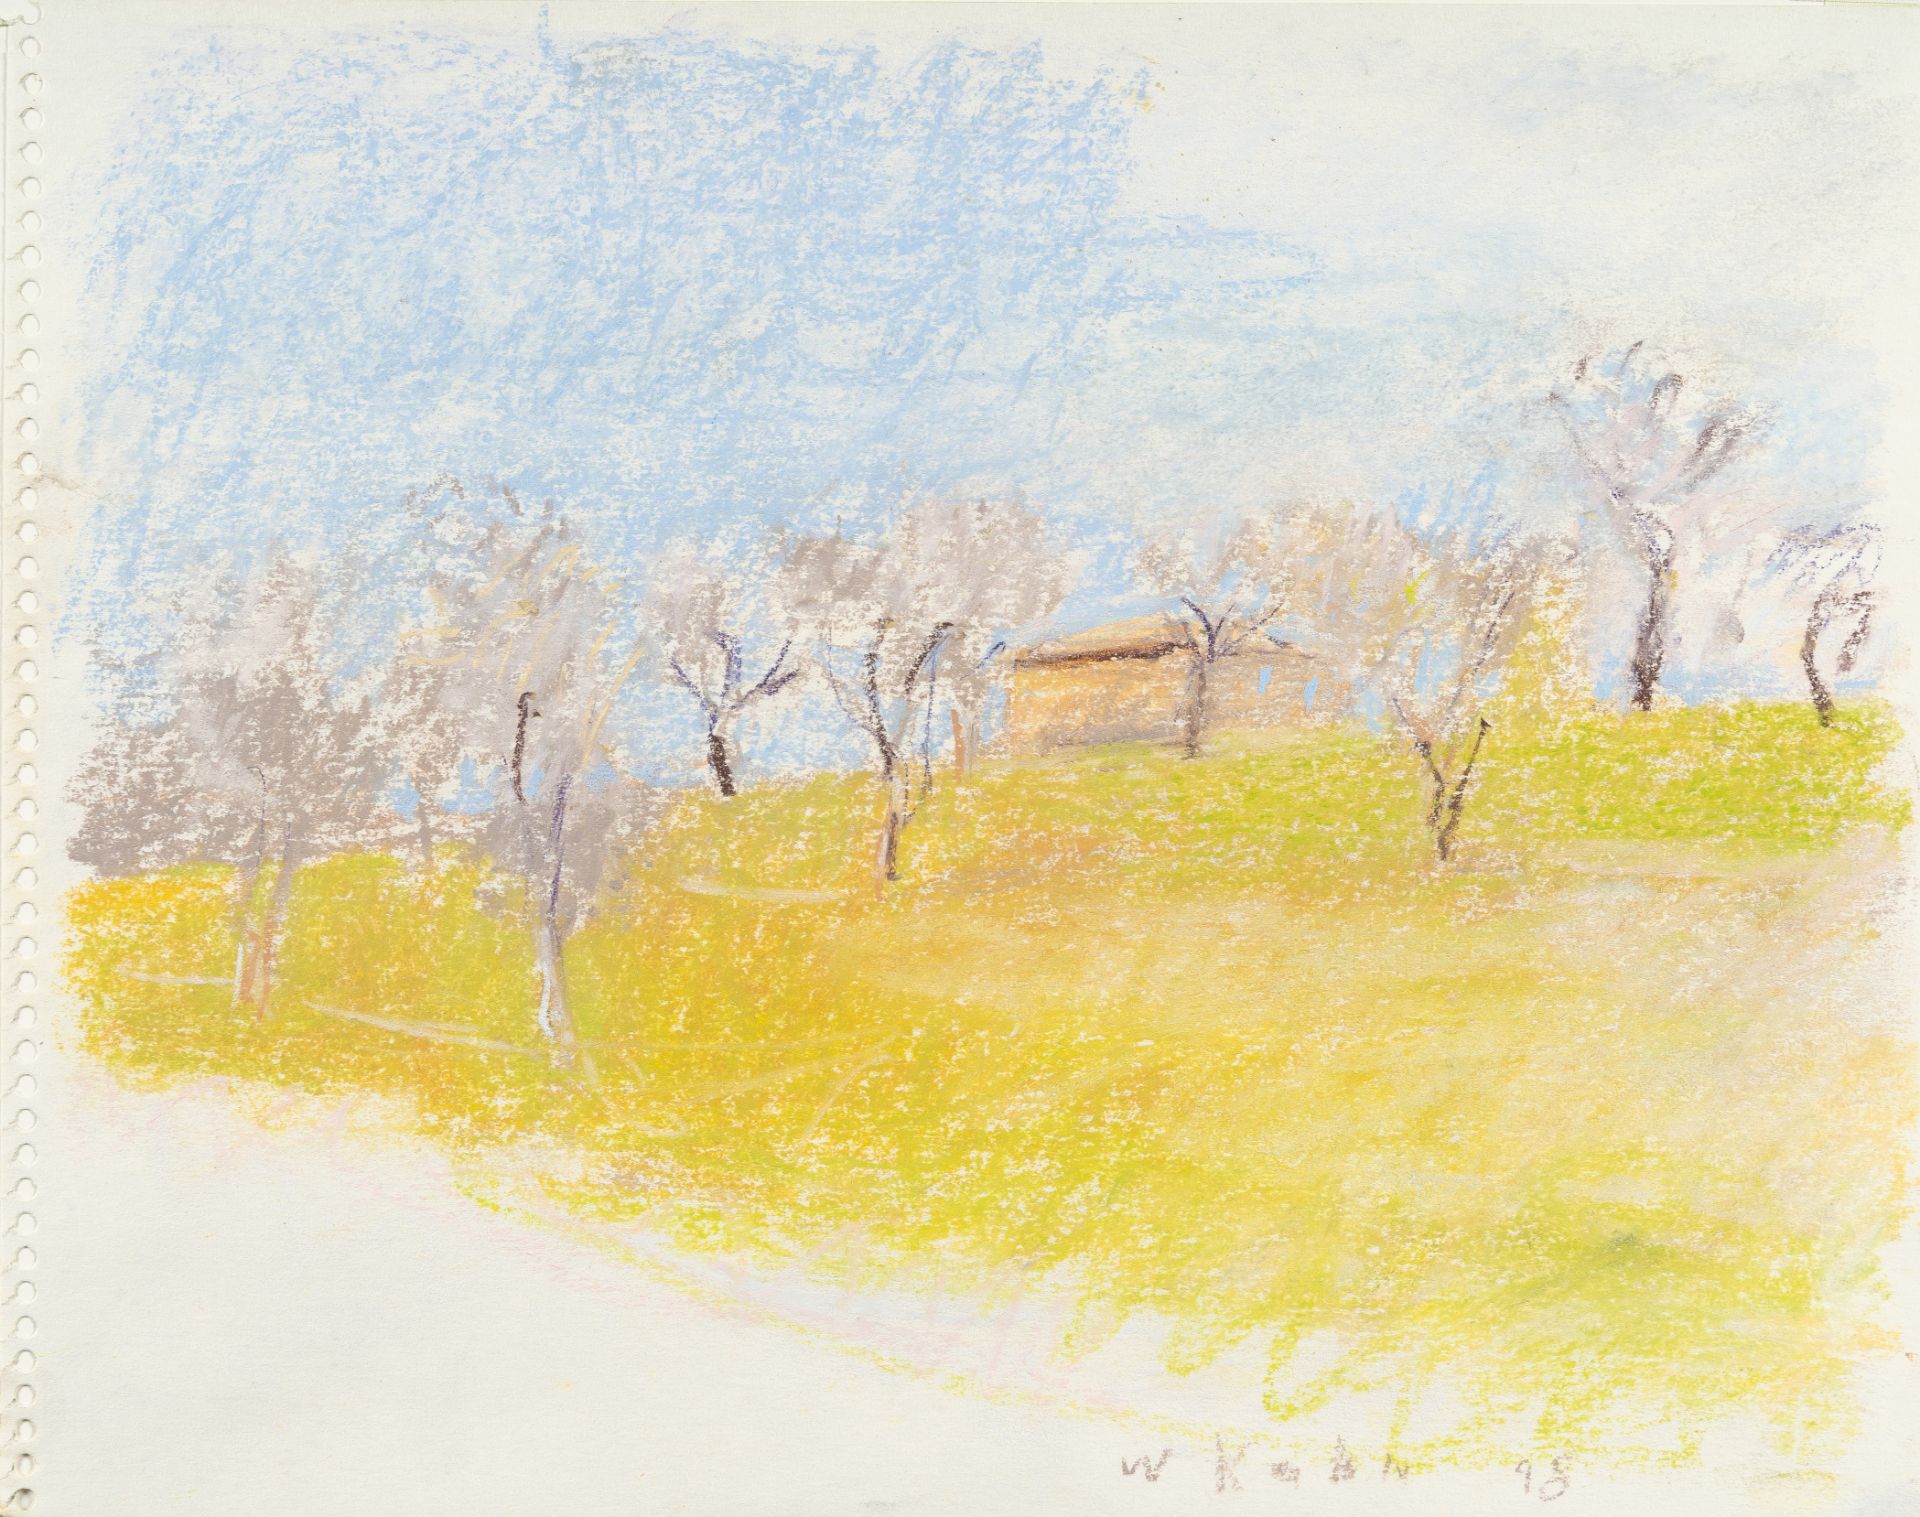 Wolf Kahn, Olive grove/Tuscany.Pastel on writing pad paper. (19)98. Ca. 28 x 35.5 cm. Signed and